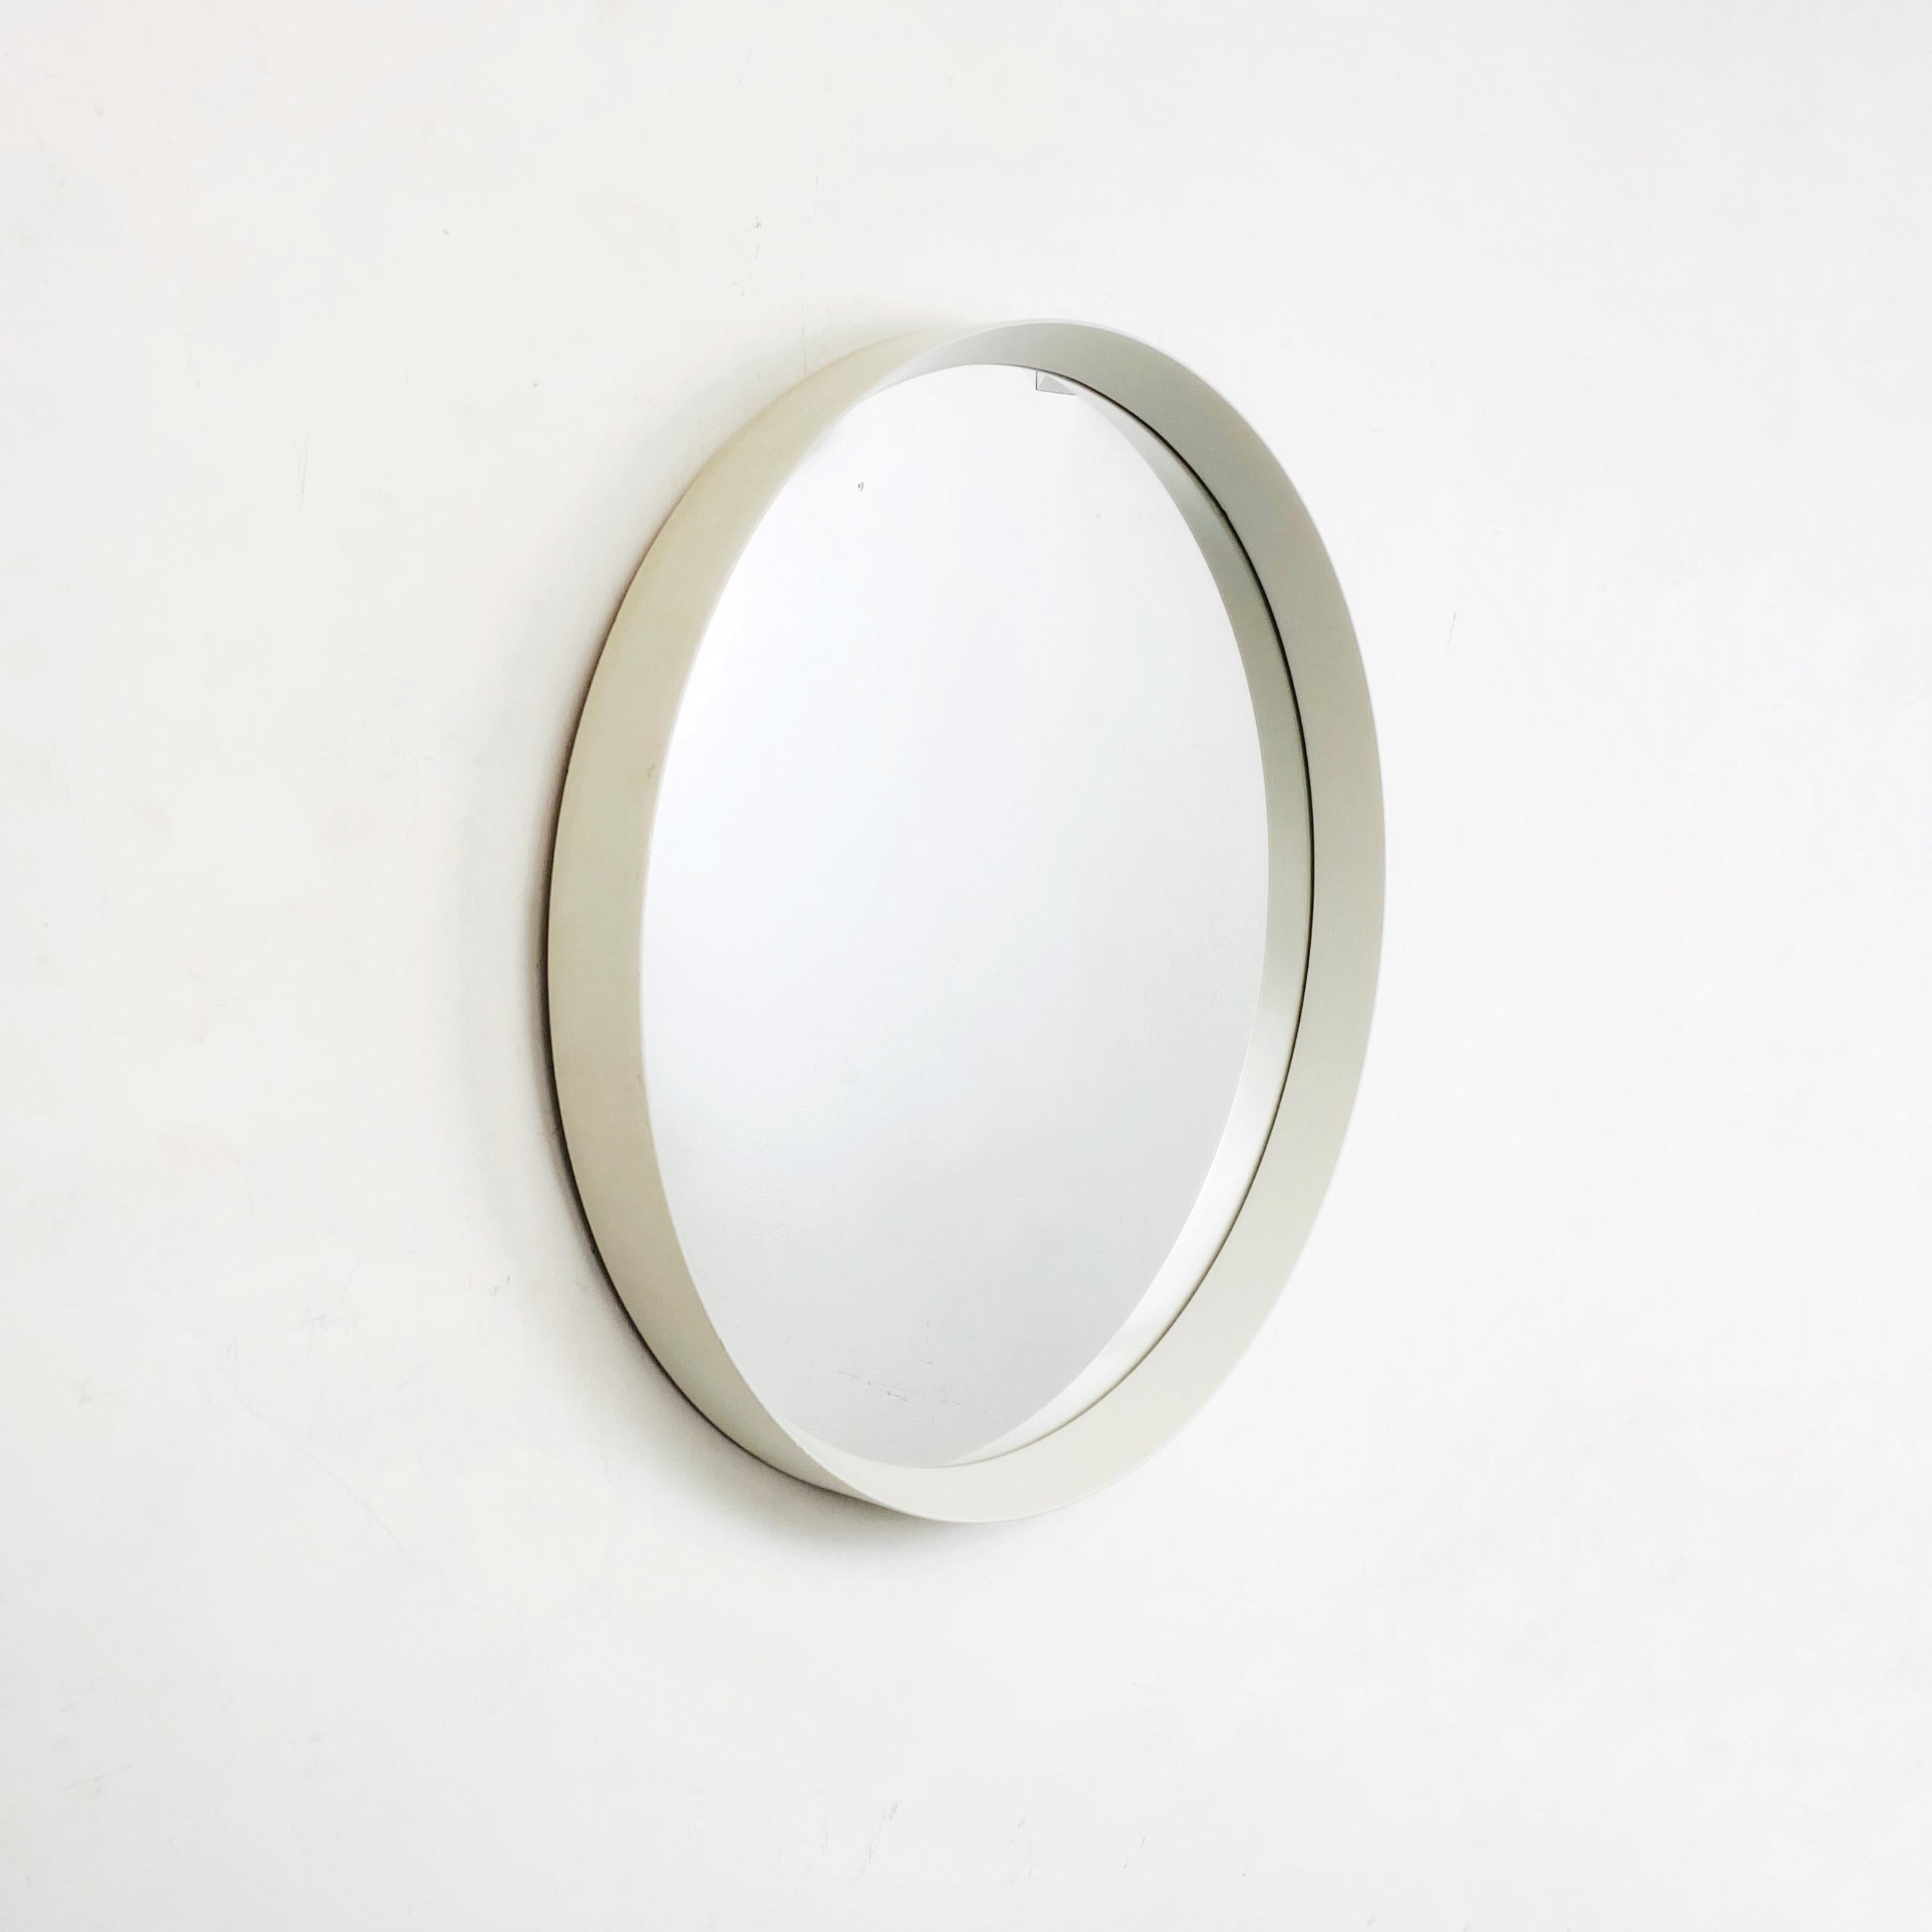 Round mirror in white wood, 1980s
Medium size round mirror with white wooden frame, cork back.

Good condition, light marks on the mirror and frame.

Measurements in cm 60x6.